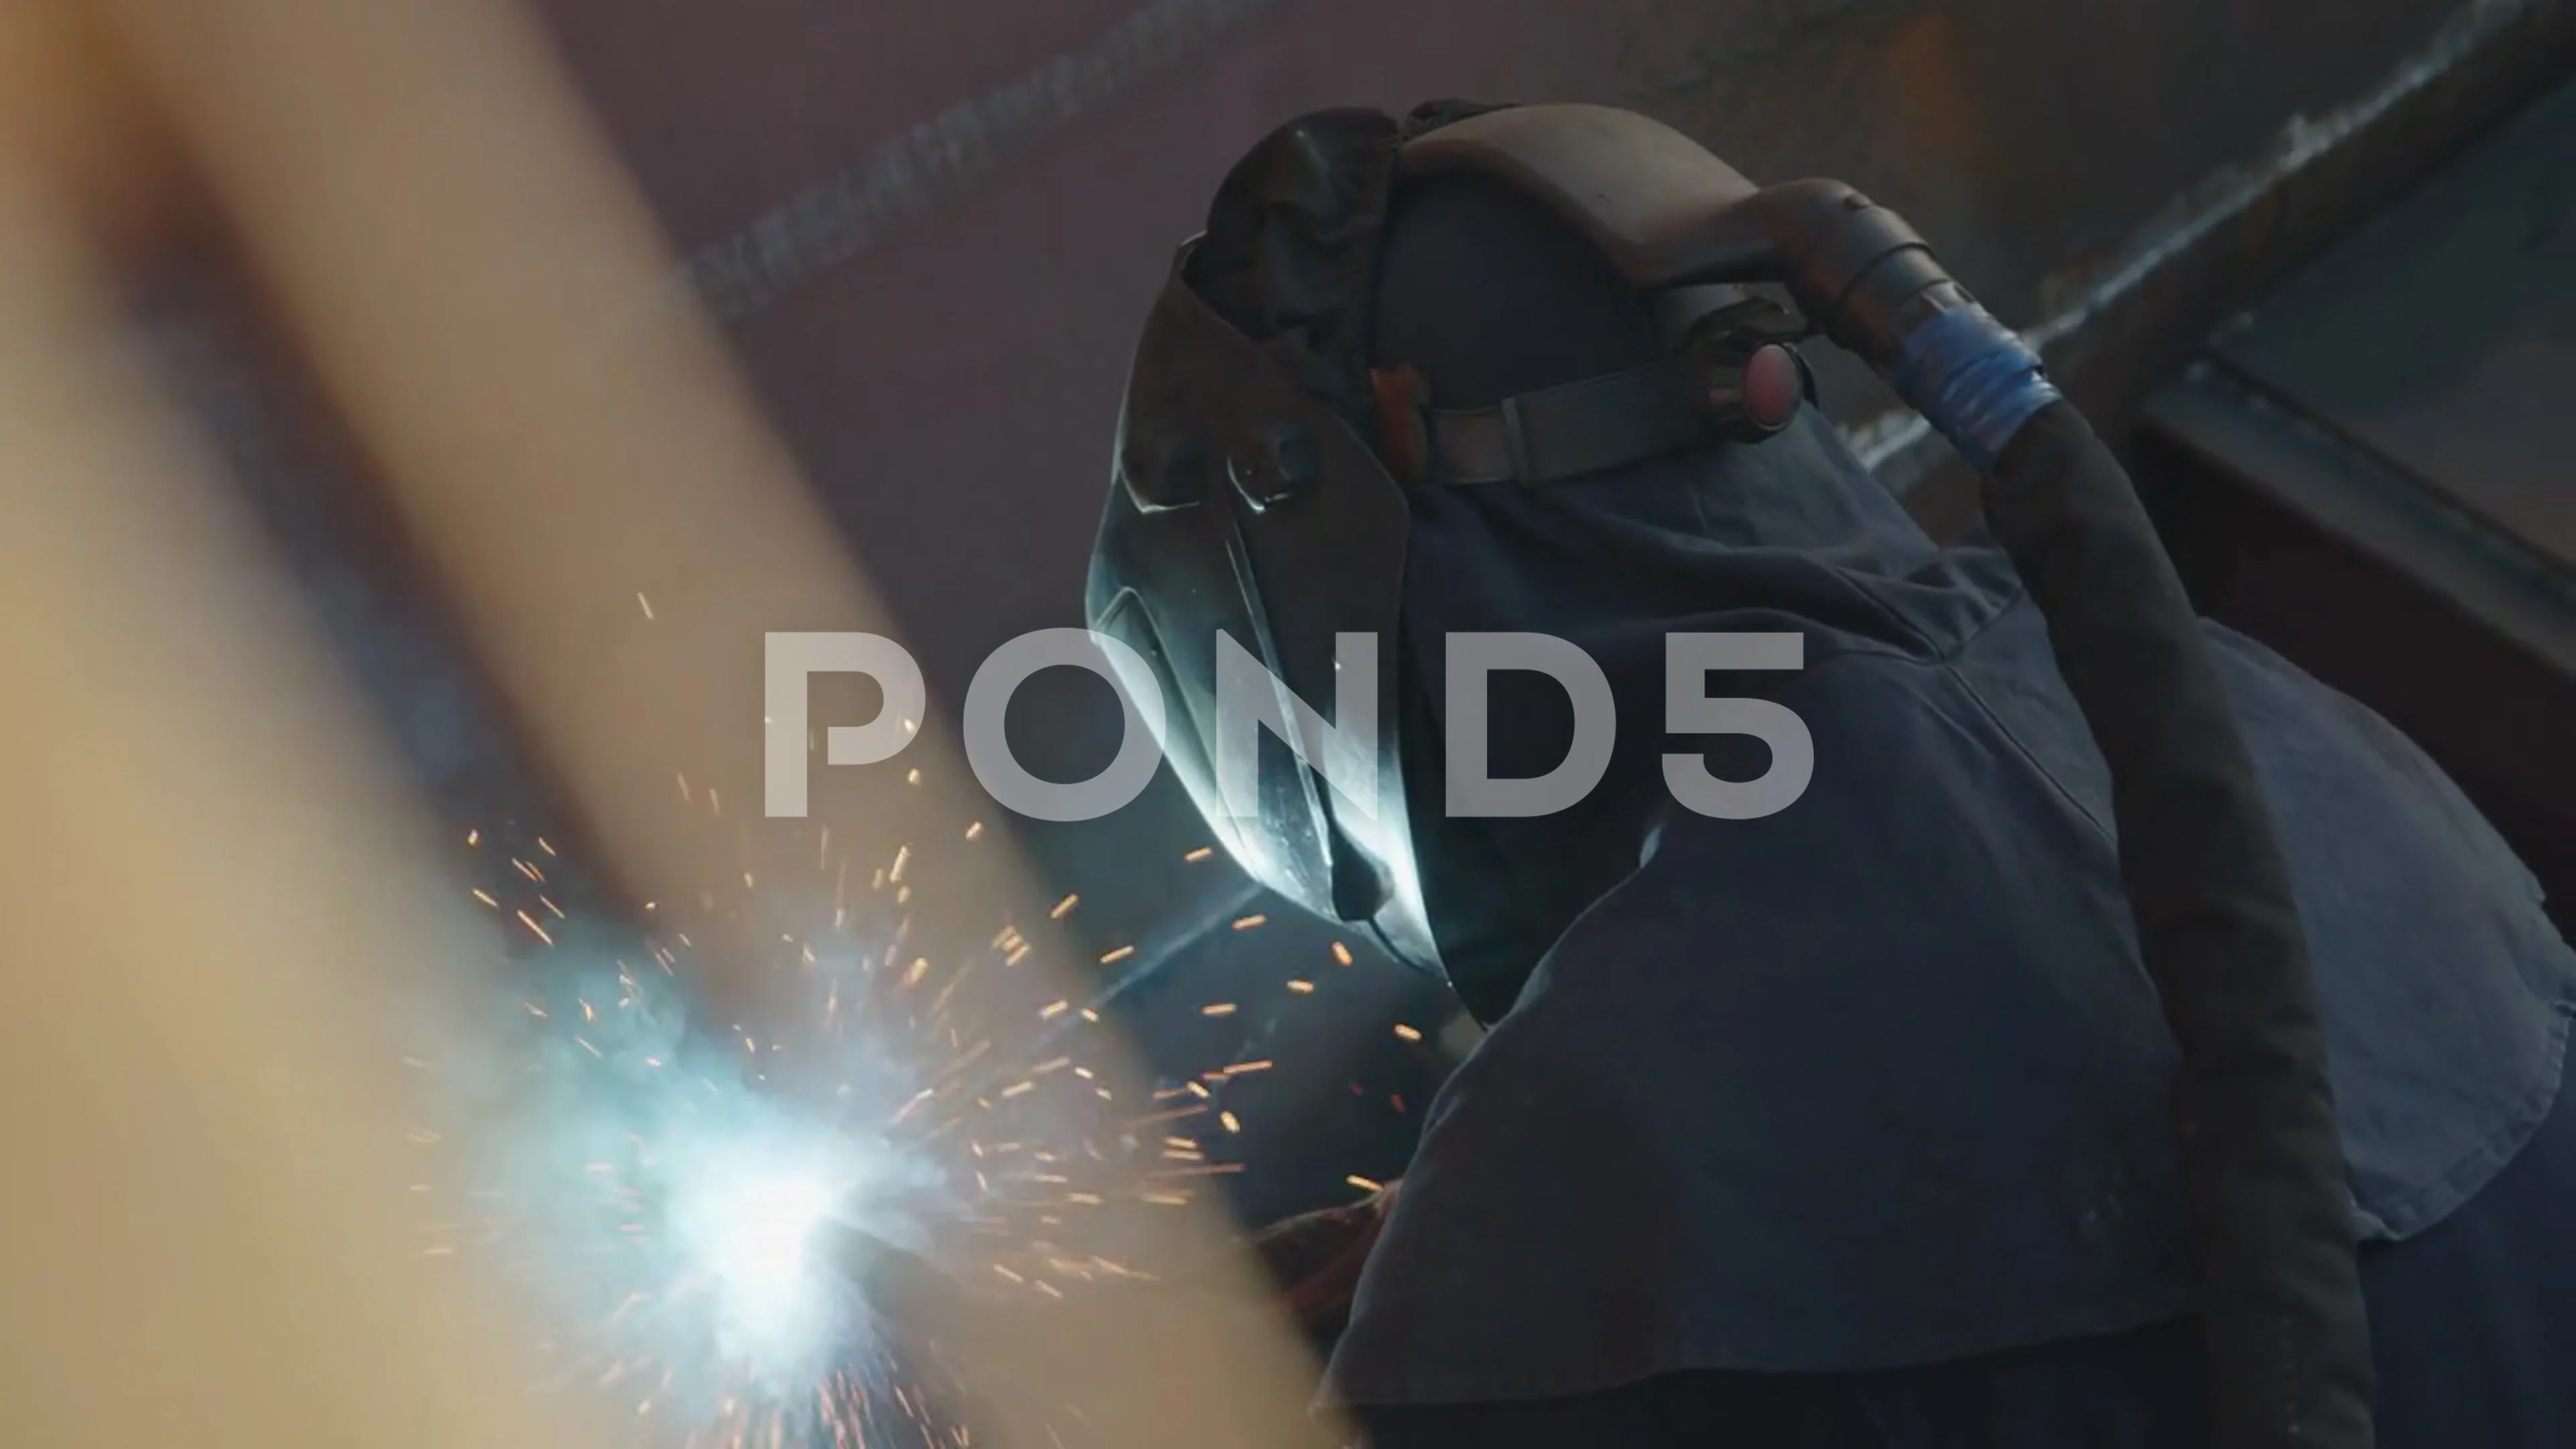 Mig Welding Stock Footage ~ Royalty Free Stock Videos | Pond5